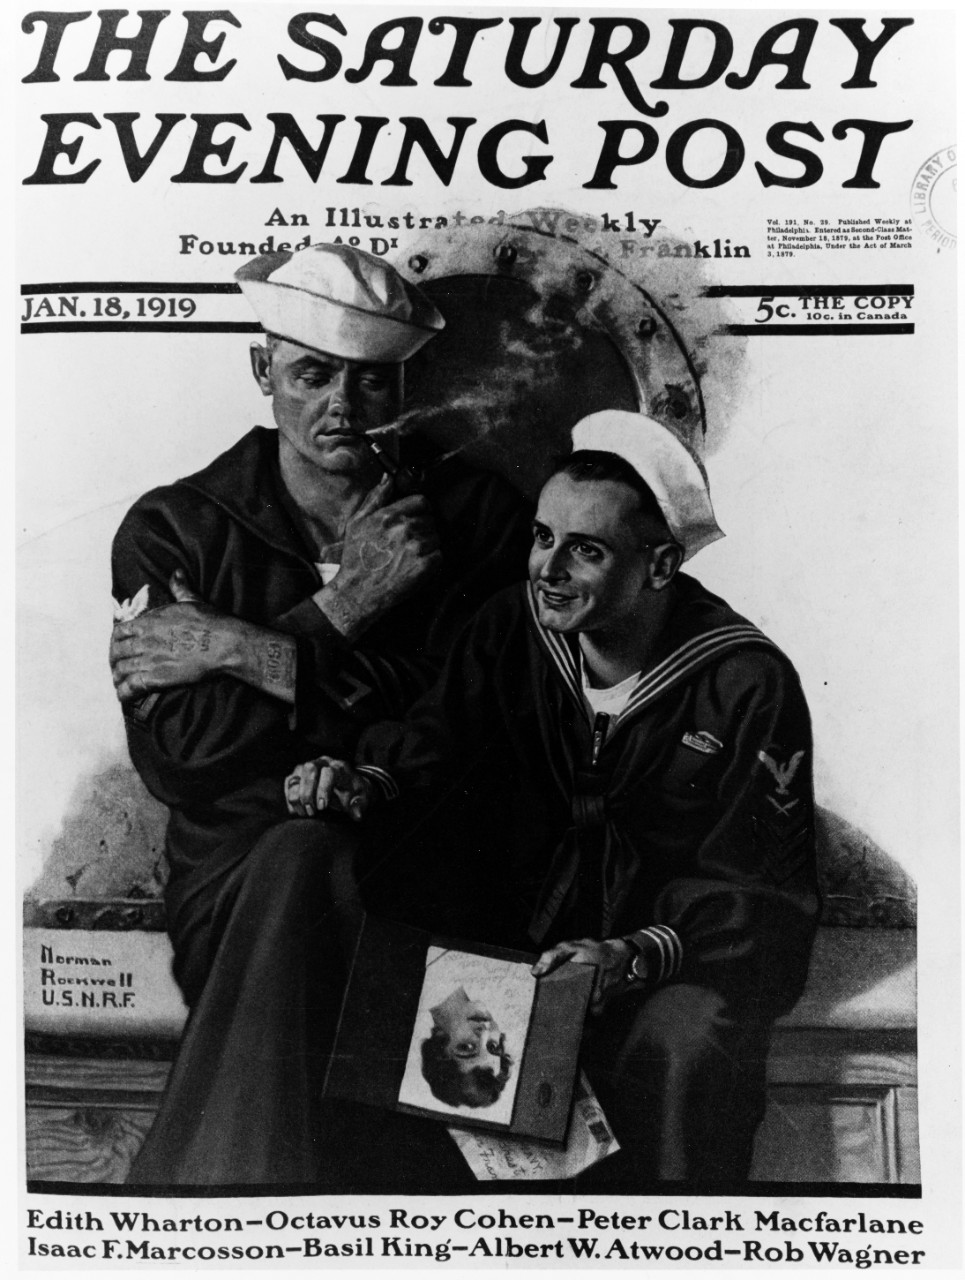 The Saturday Evening Post Cover, 18 January 1919.